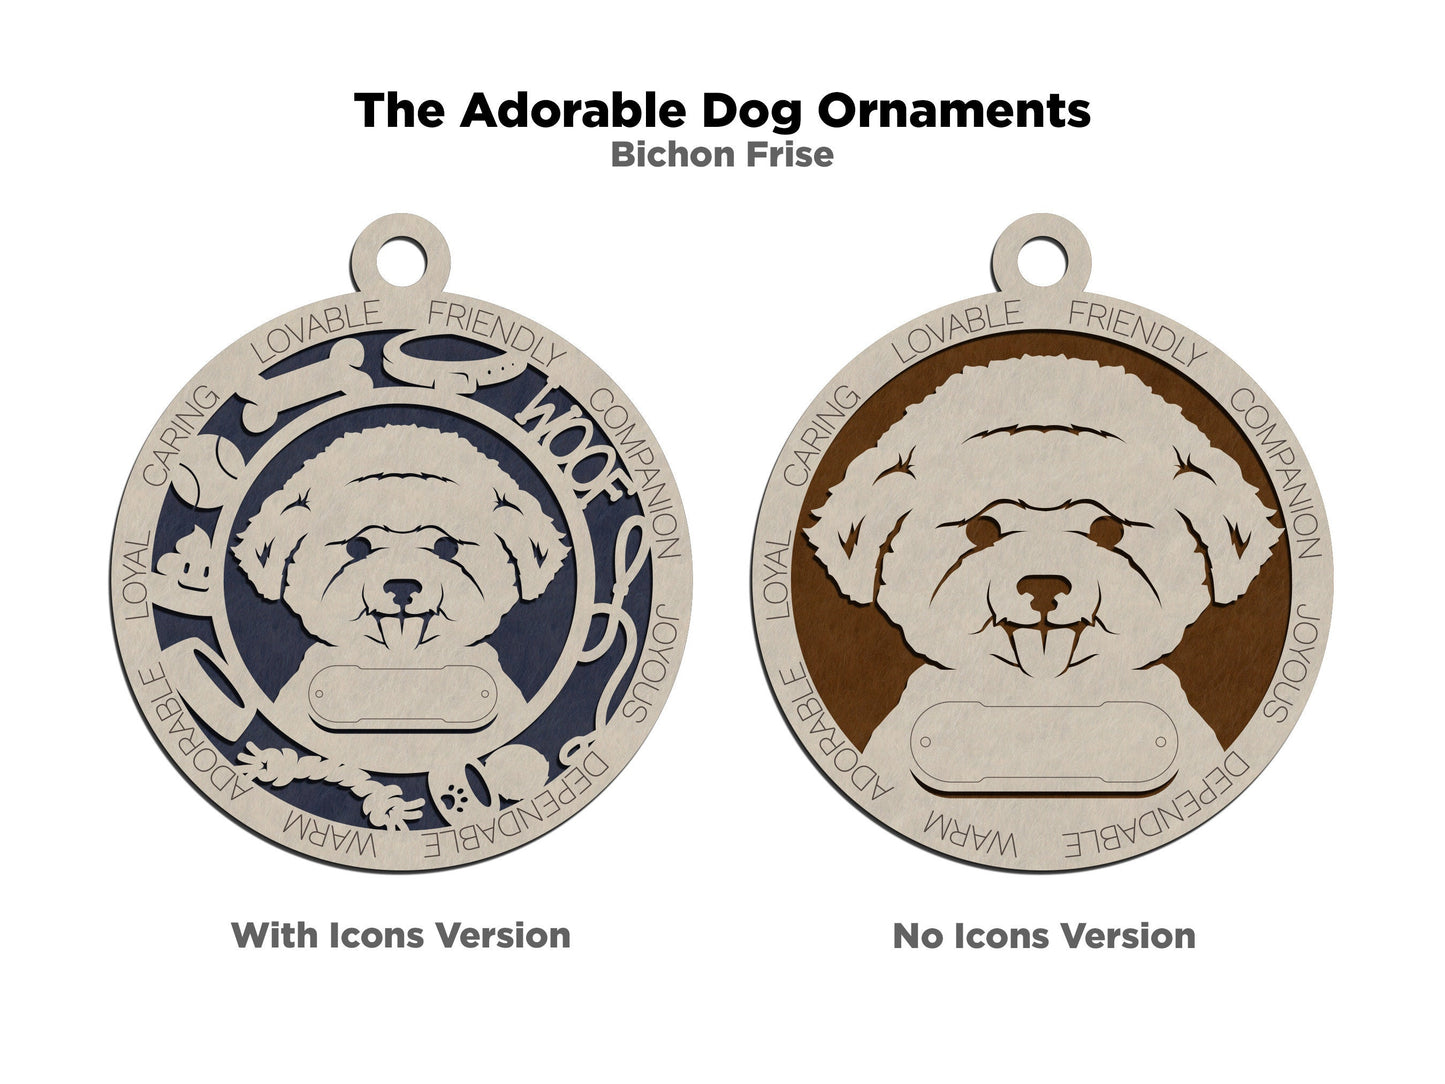 Bichon Frise - Adorable Dog Ornaments - 2 Ornaments included - SVG, PDF, AI File Download - Sized for Glowforge